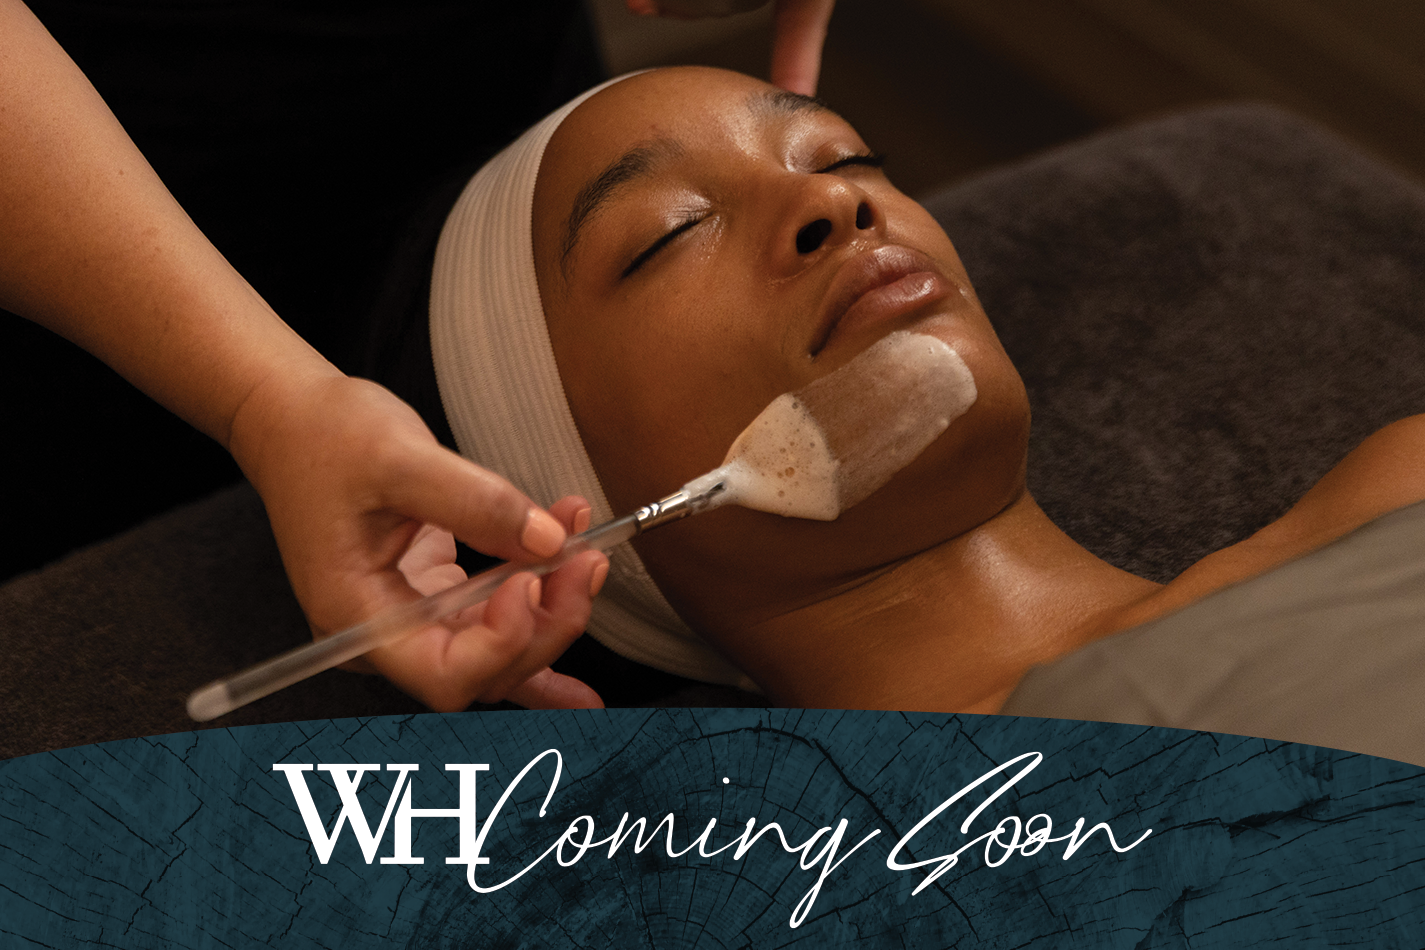 Woodhouse Spa Grandview, located in Grandview Heights, OH is opening in Fall 2023.